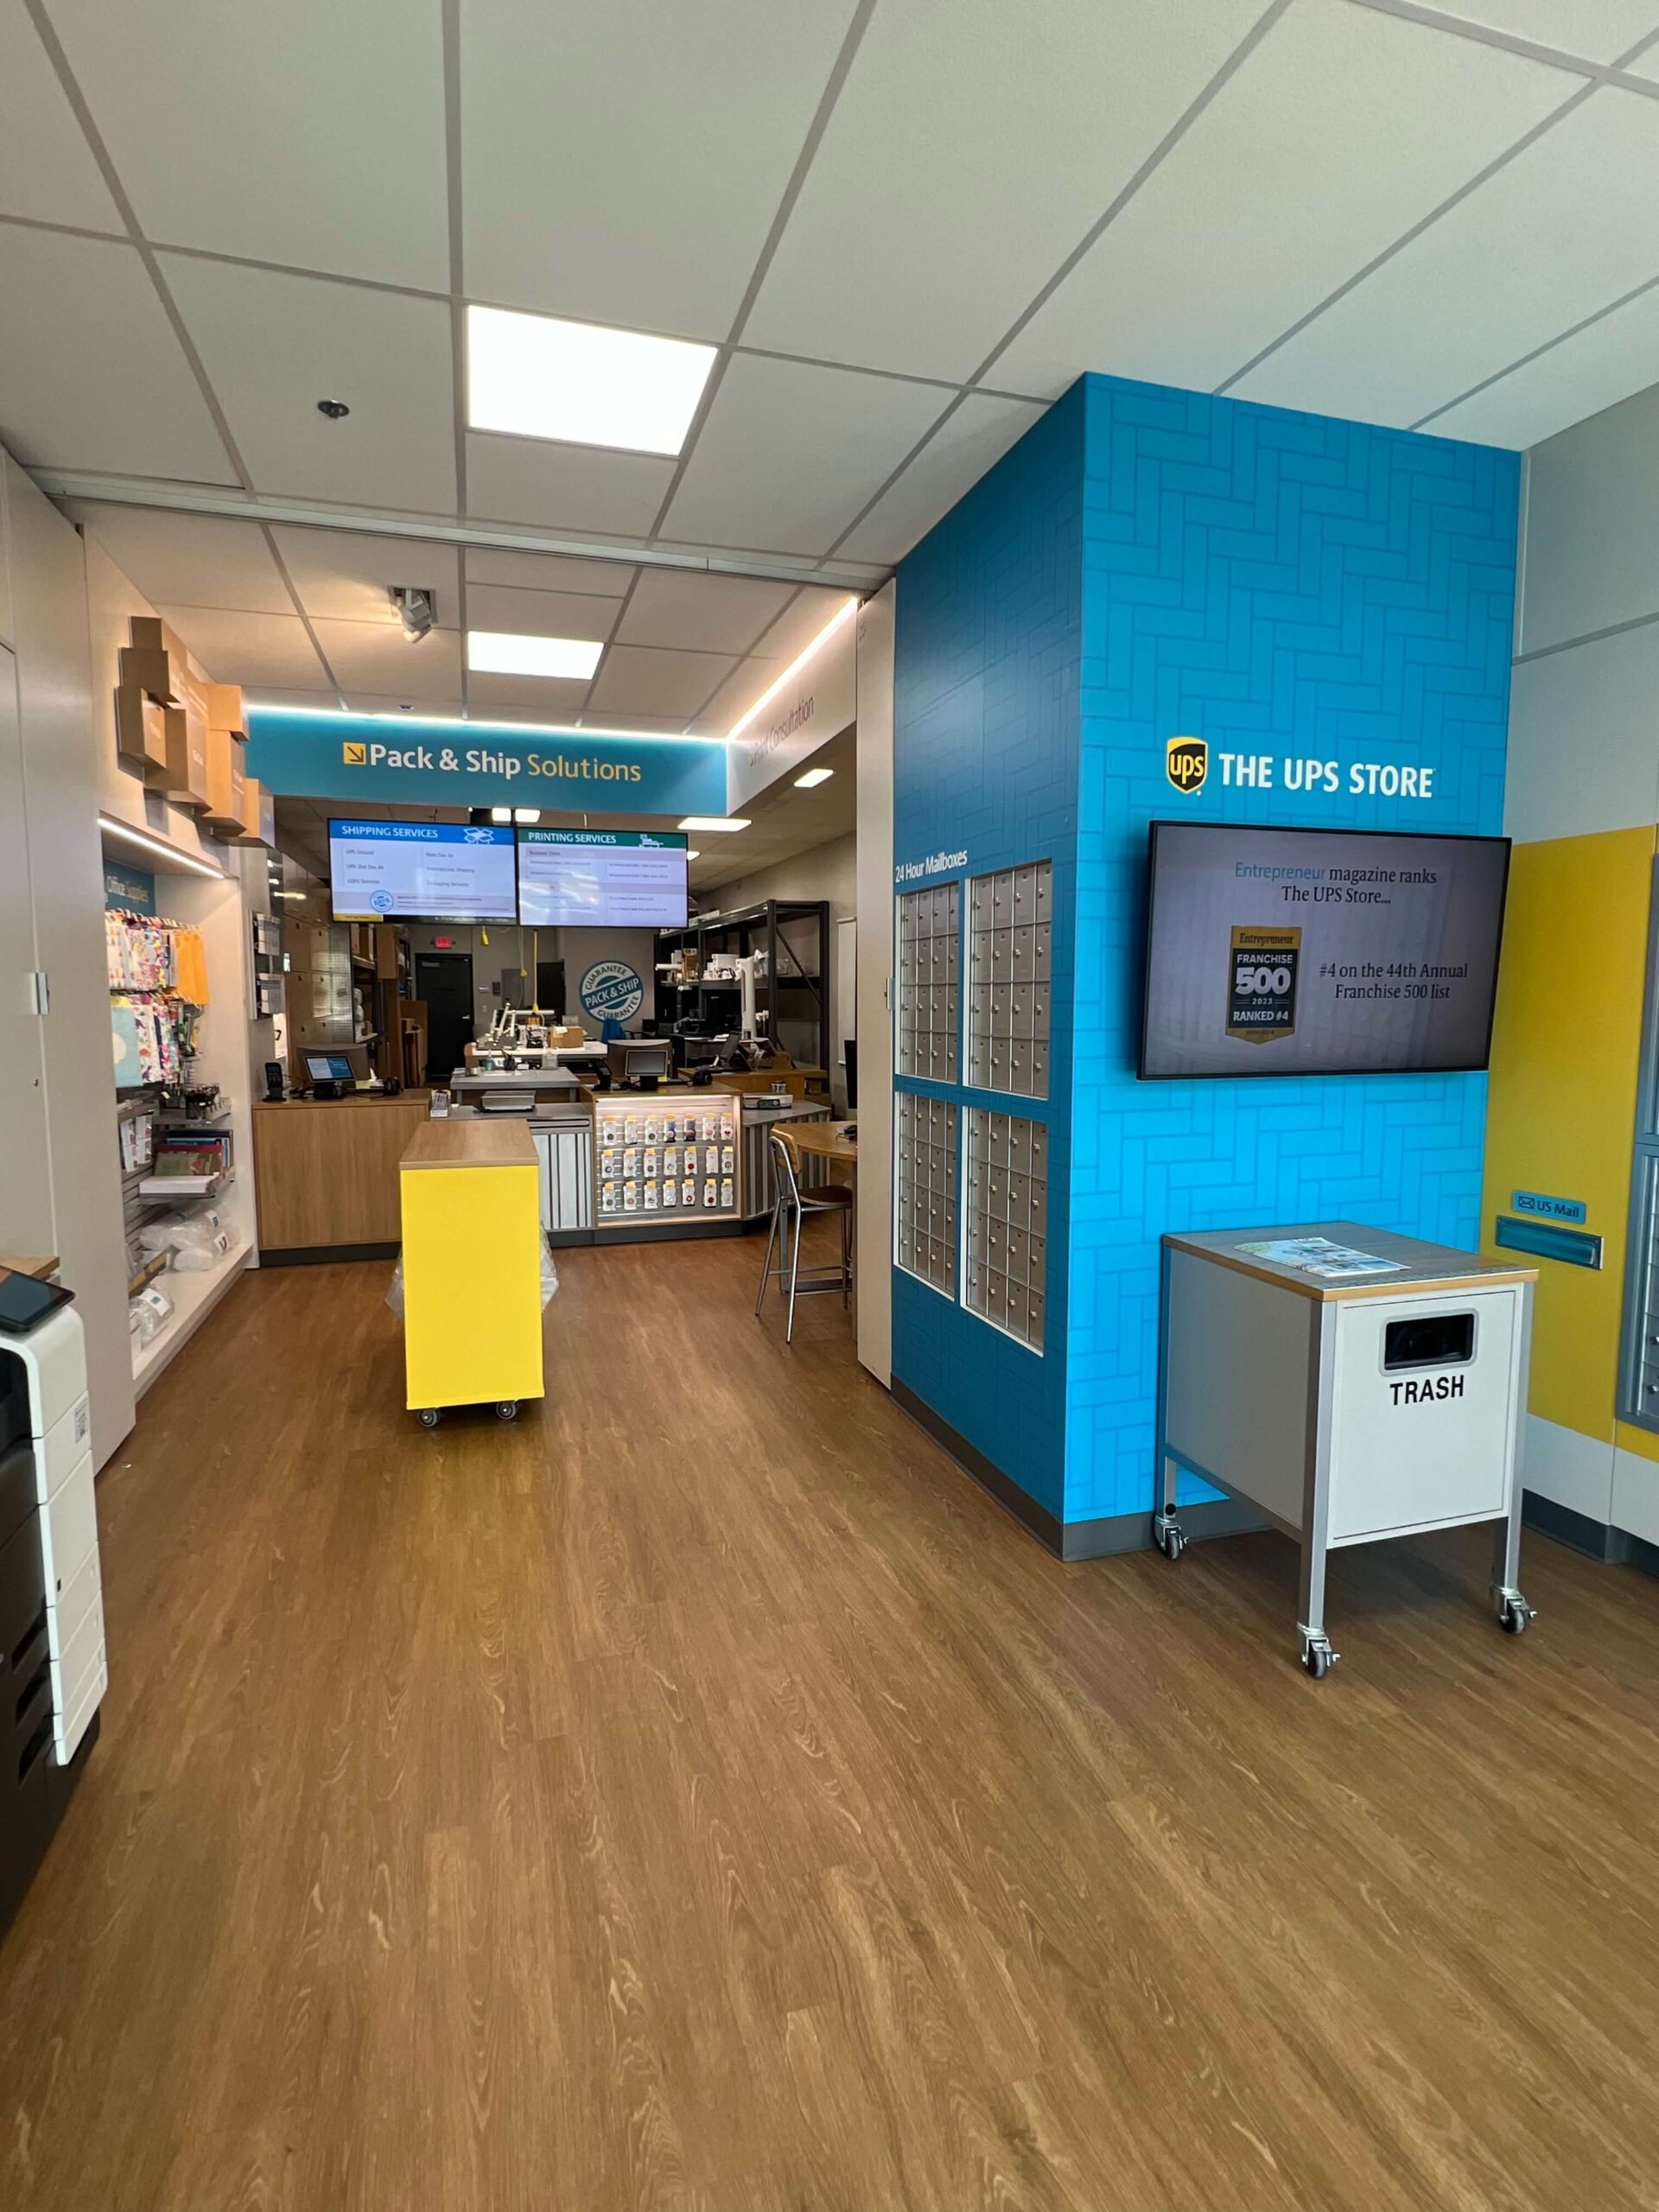 The interior of a store with blue and yellow walls.